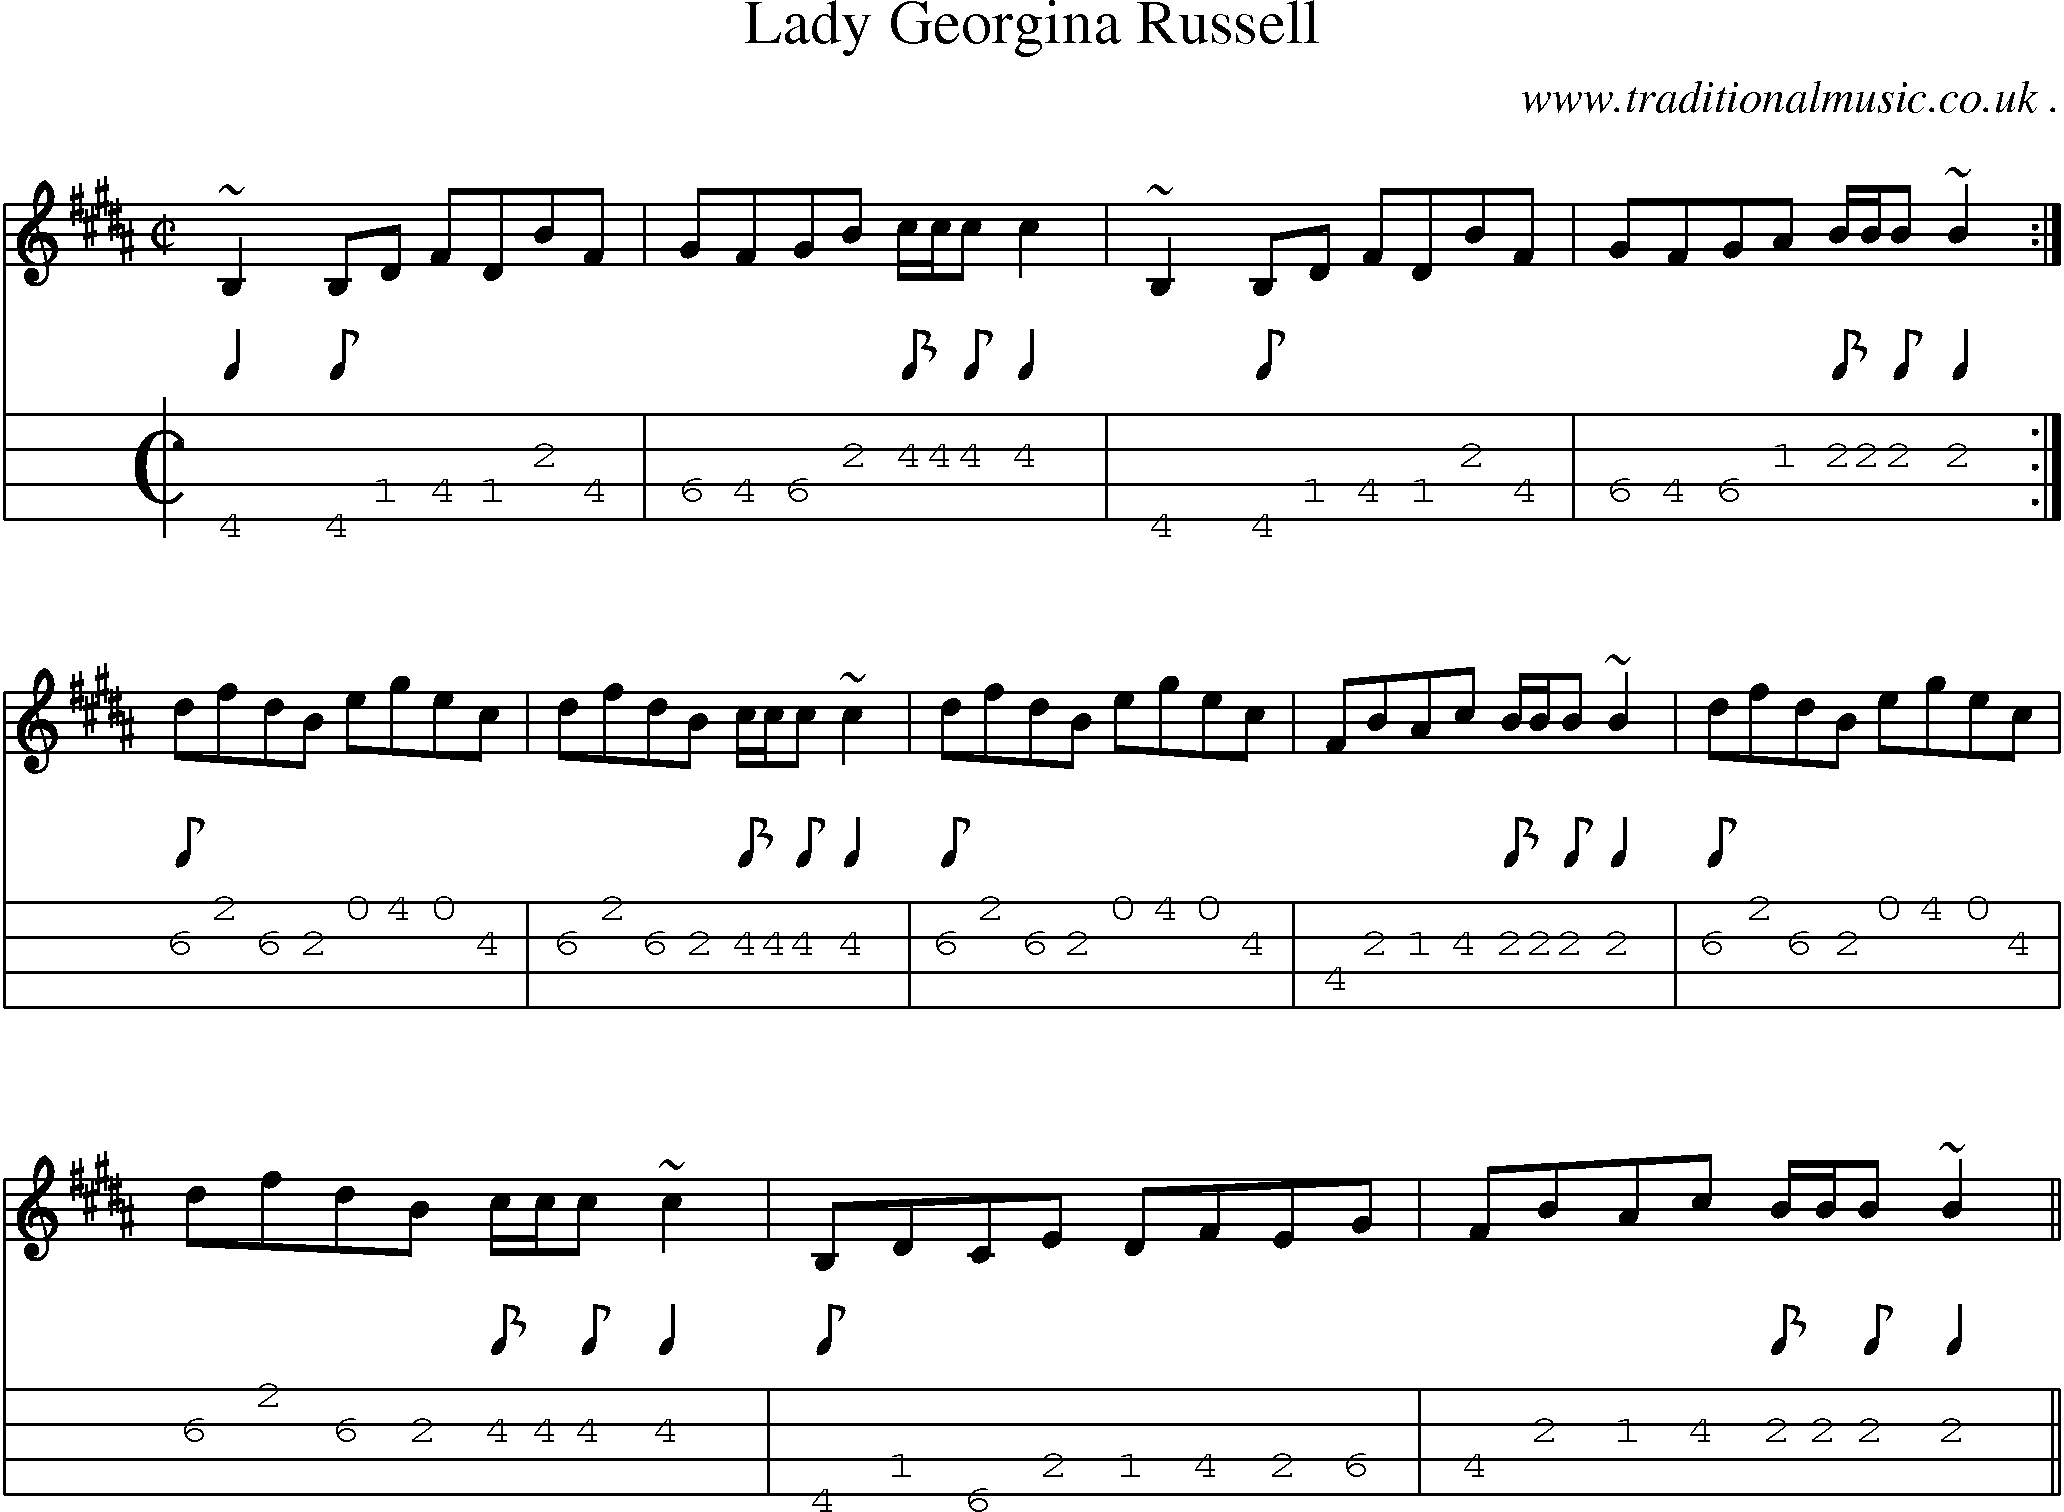 Sheet-music  score, Chords and Mandolin Tabs for Lady Georgina Russell